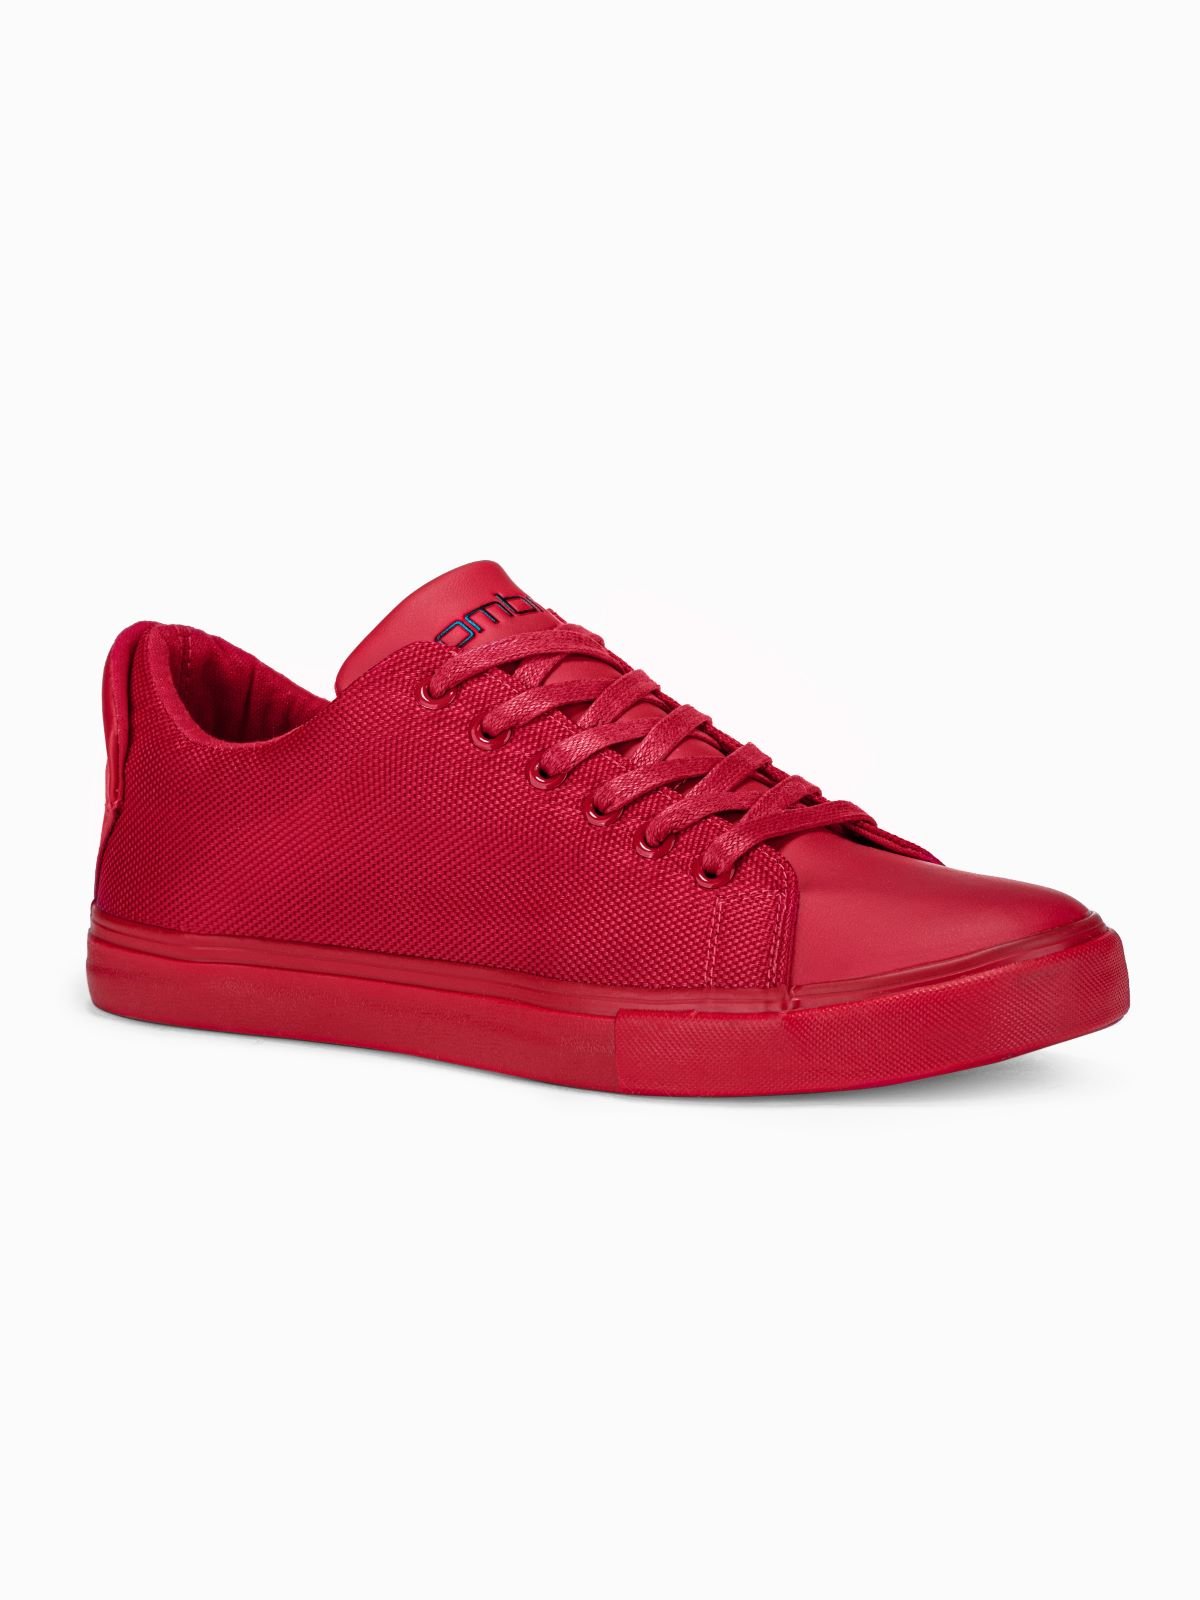 Levně Ombre BASIC men's shoes sneakers in combined materials - red